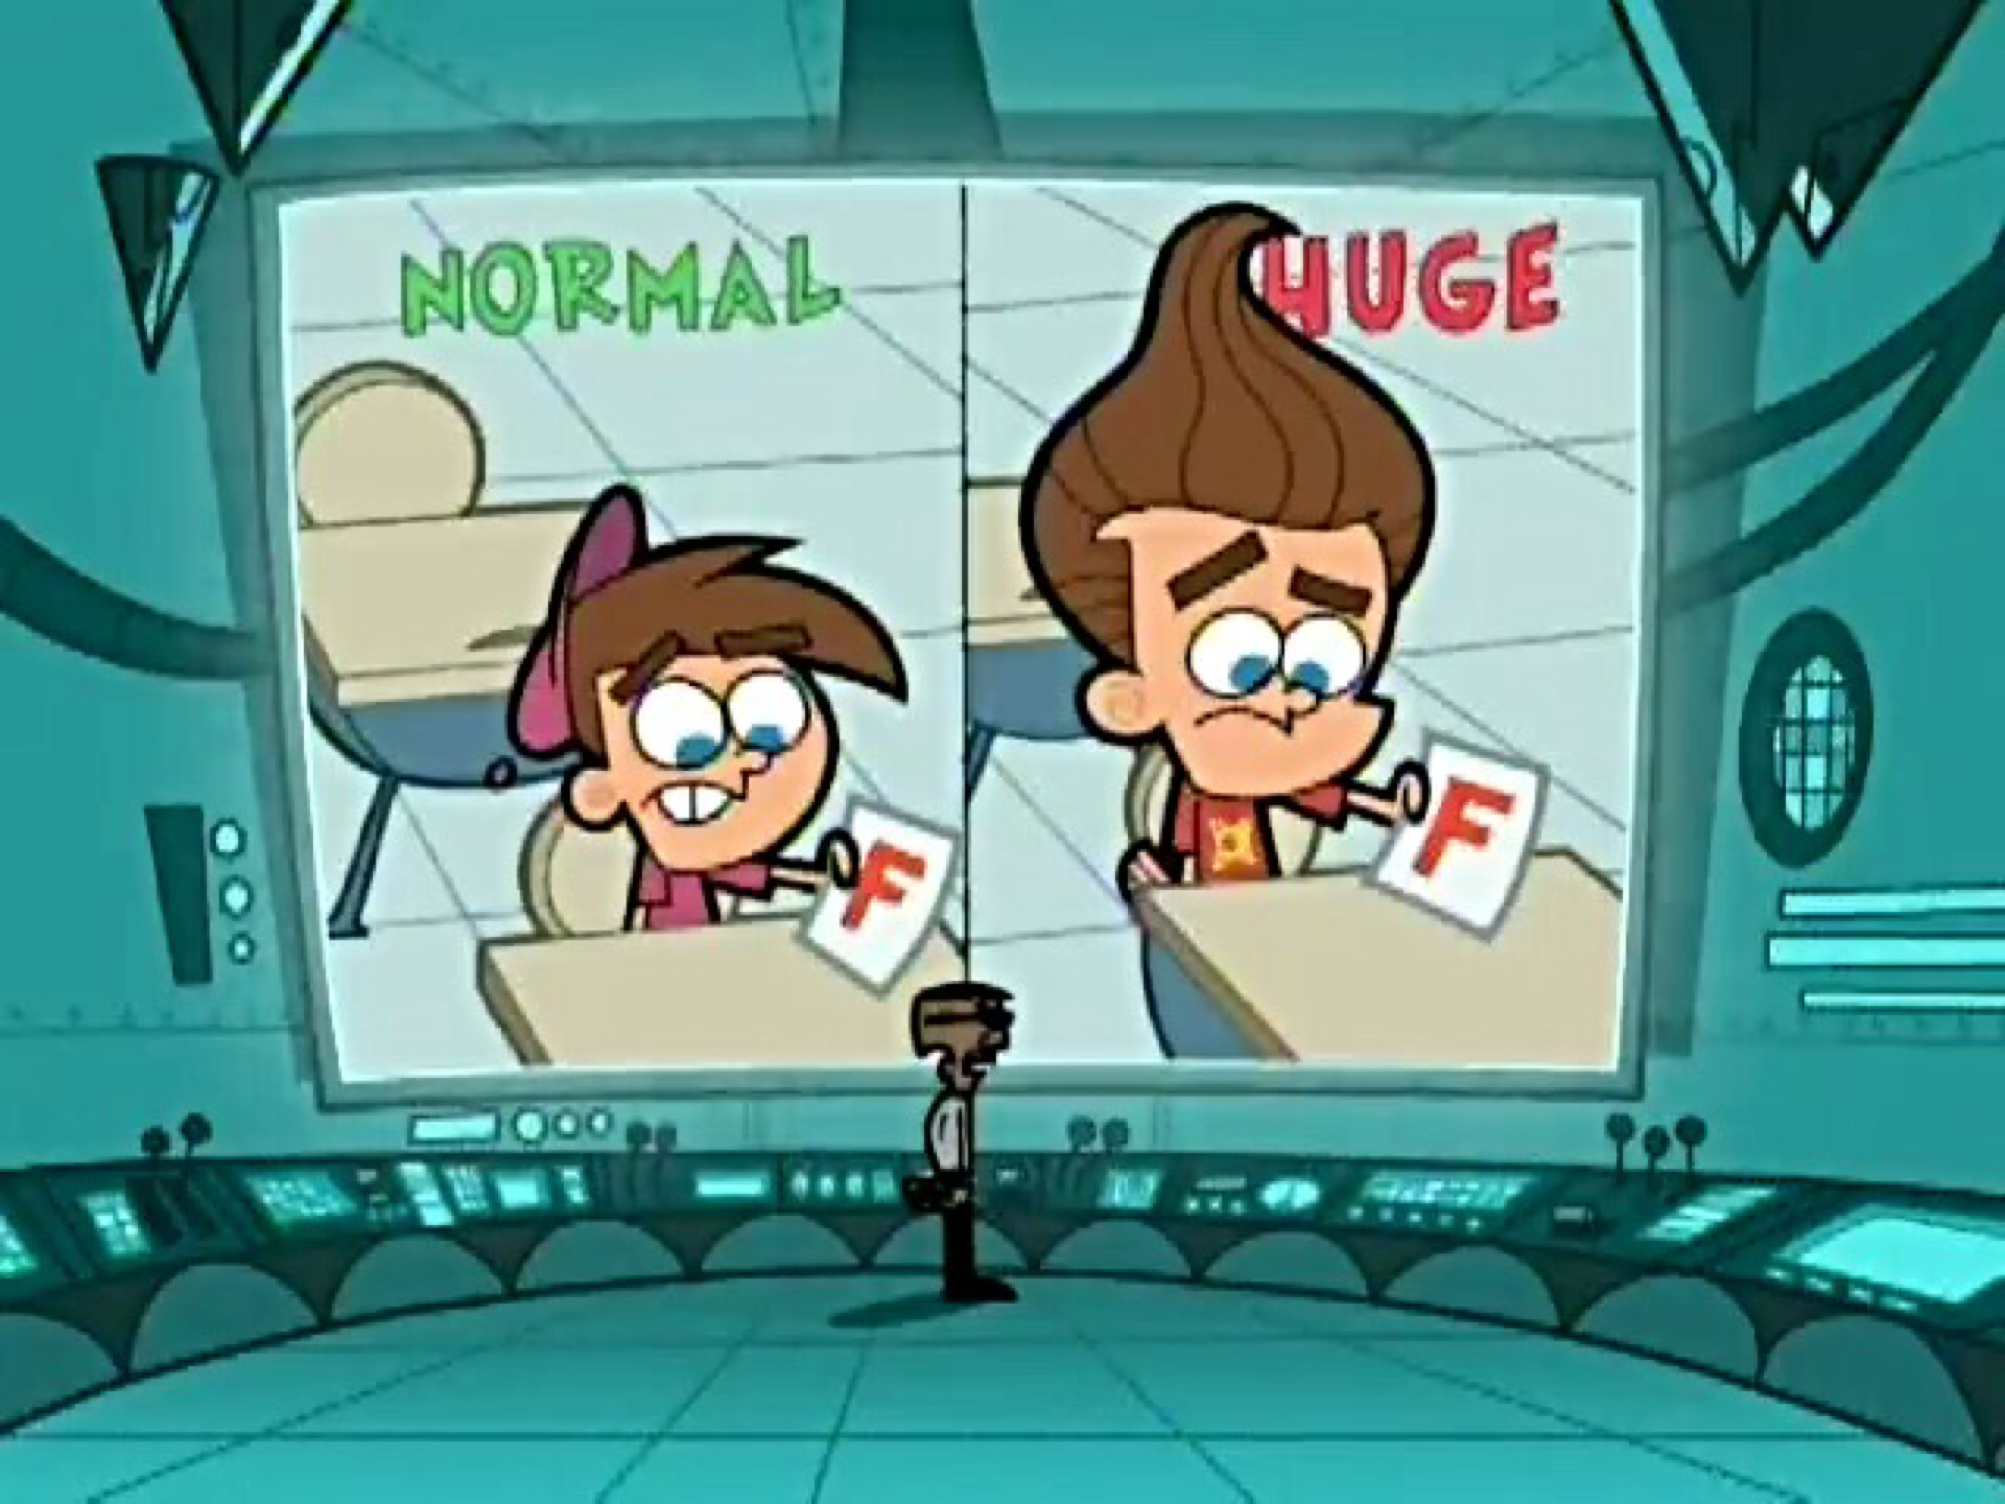 fairly odd parents time out cage